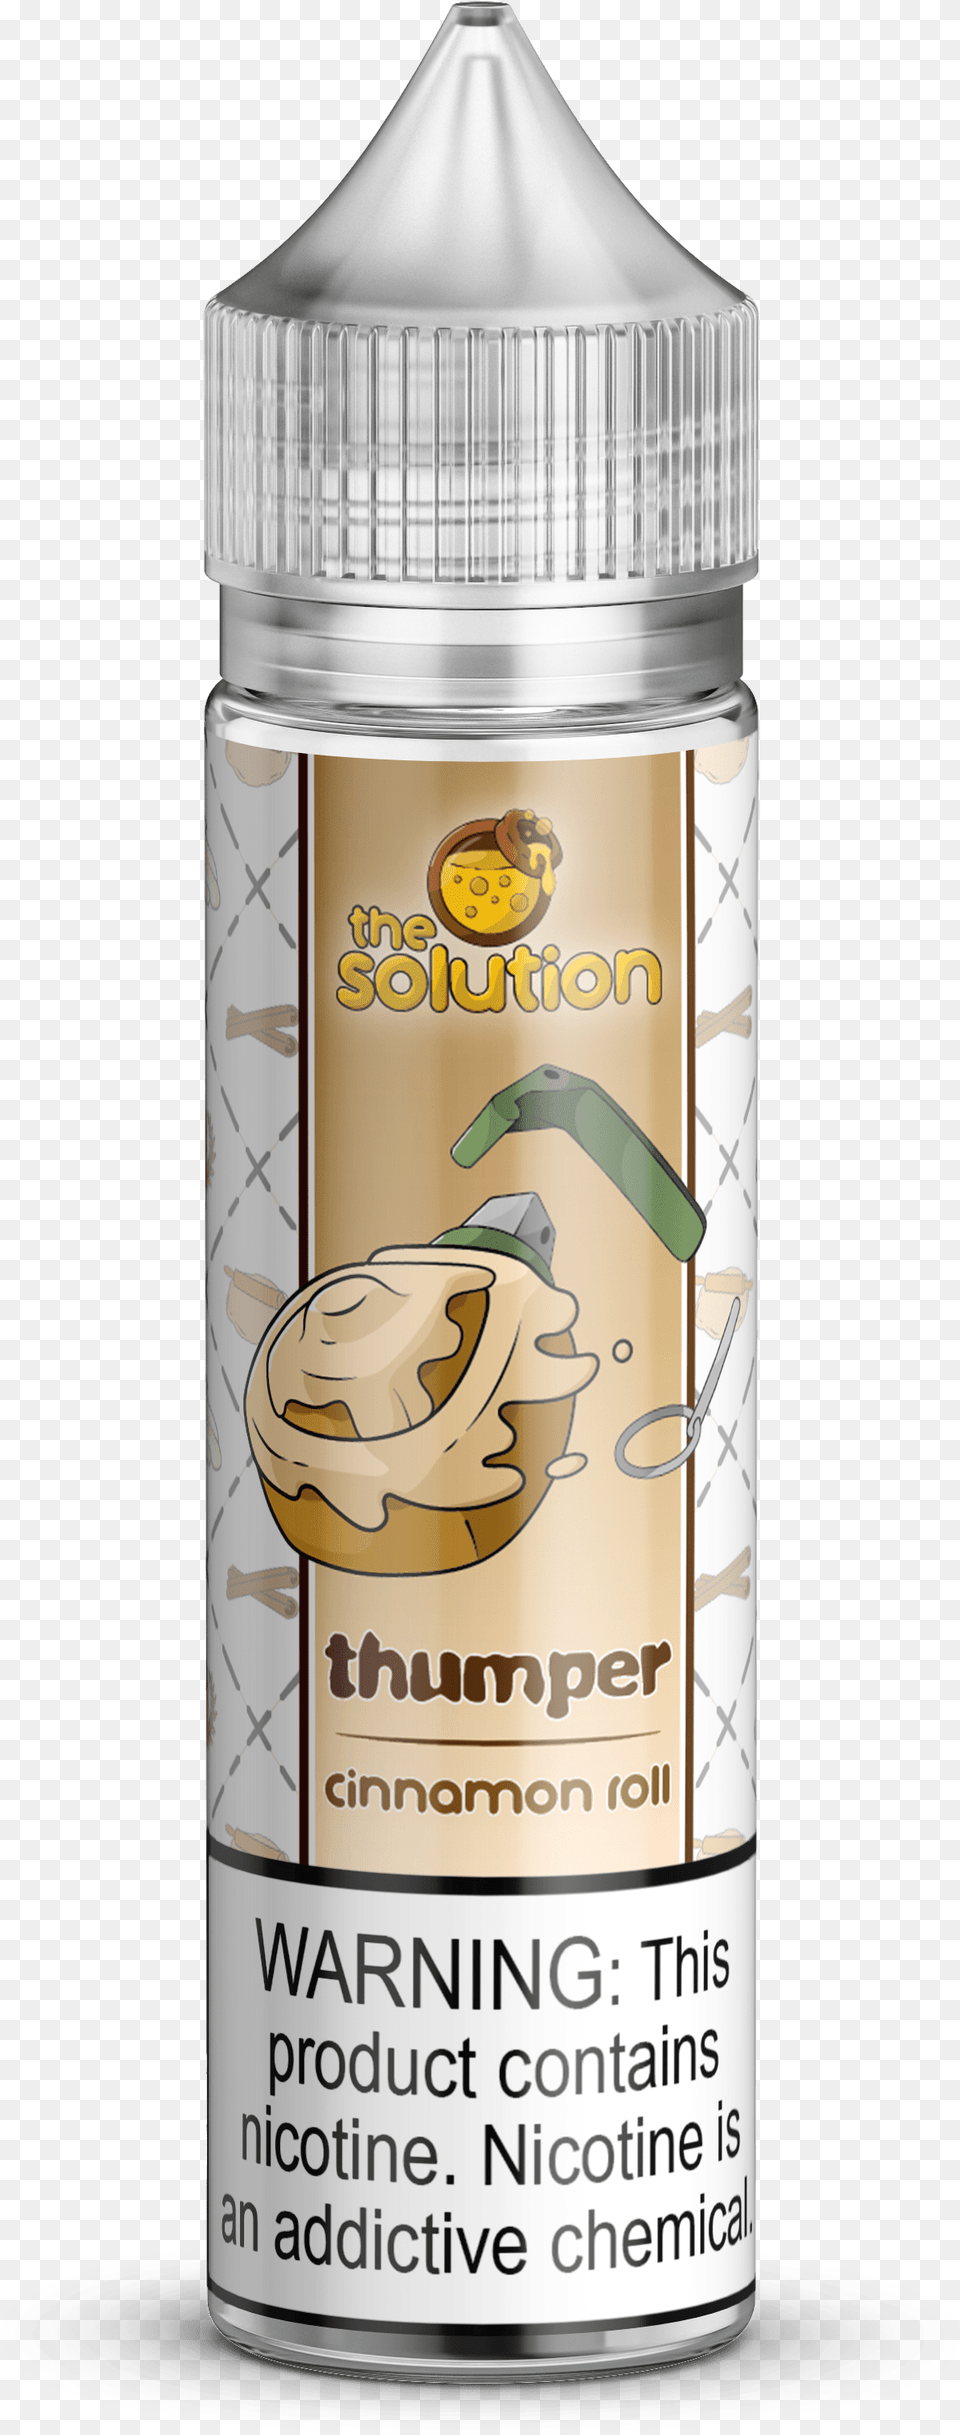 Thumper Electronic Cigarette, Bottle, Shaker, Cosmetics Free Png Download